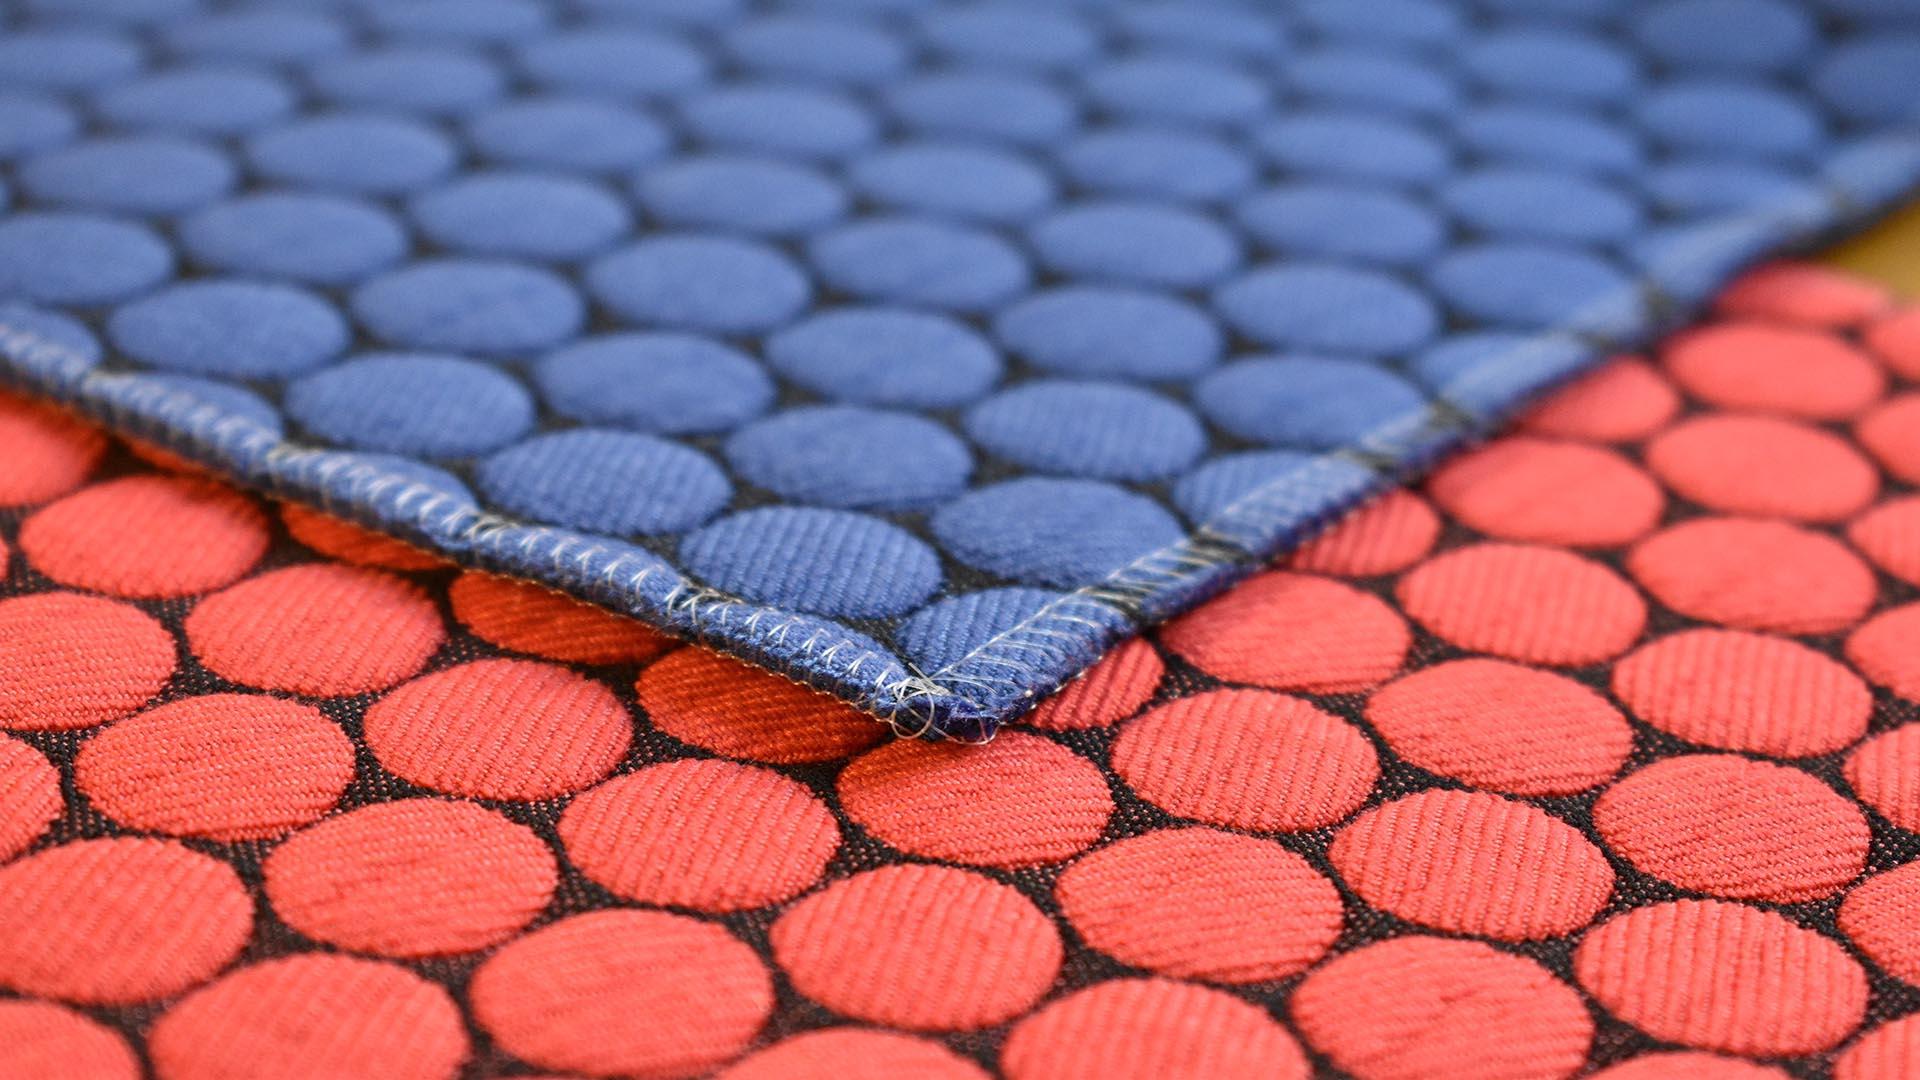  red and blue tiles of fabric